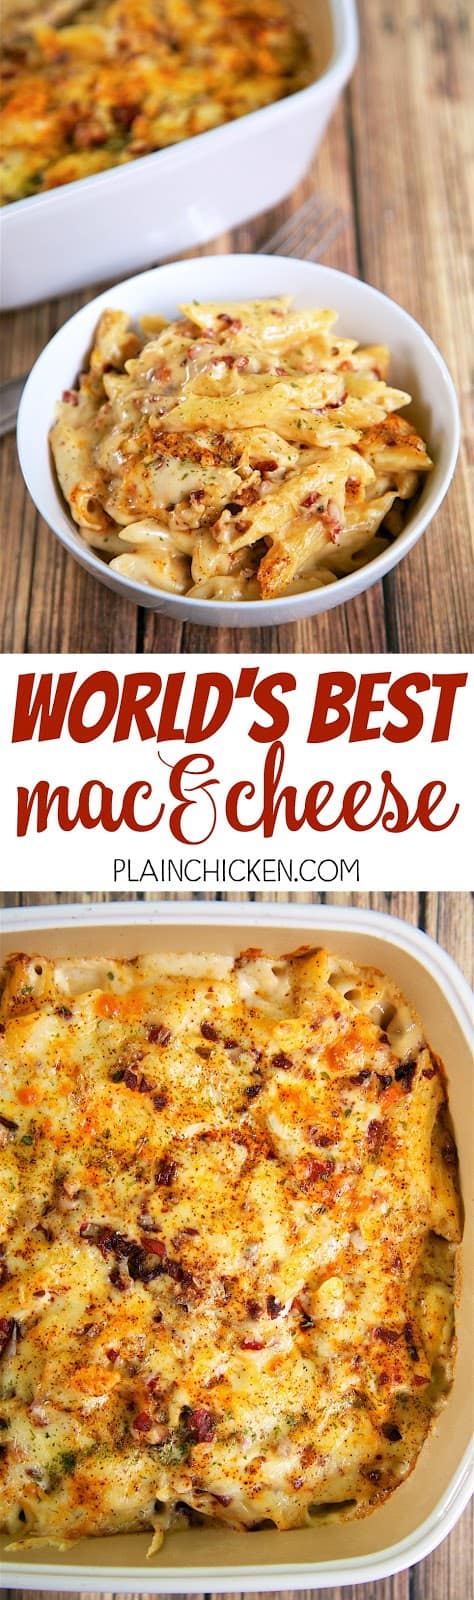 World's Best Mac and Cheese - so creamy, cheese and delicious! Just like the original at Beecher's in Seattle! Pasta tossed in a quick homemade cheese sauce with Jarlsberg and Jack cheese. We added pancetta - crazy good! Everyone cleaned their plate!